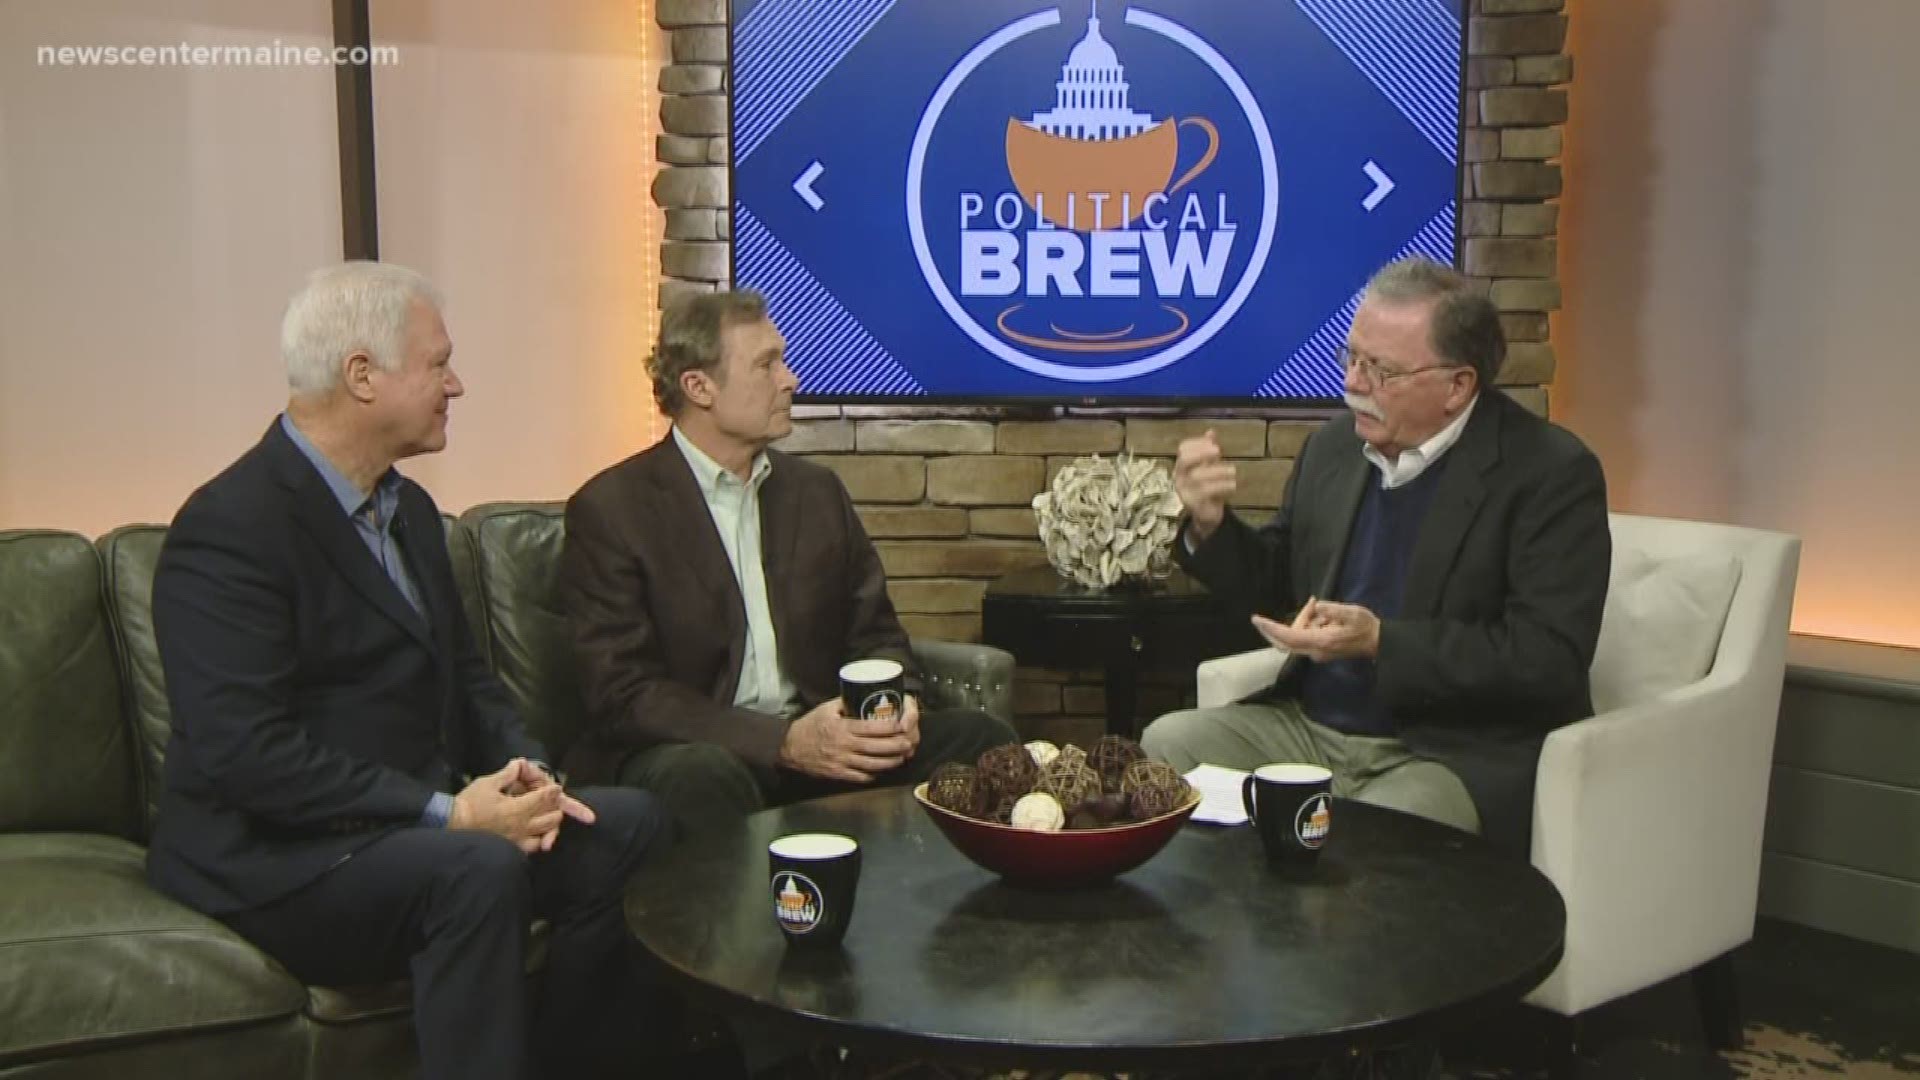 News Center Maine's Don Carrigan chats with Political Brew commentators Phil Harriman and John Richards about the week in politics in Maine.